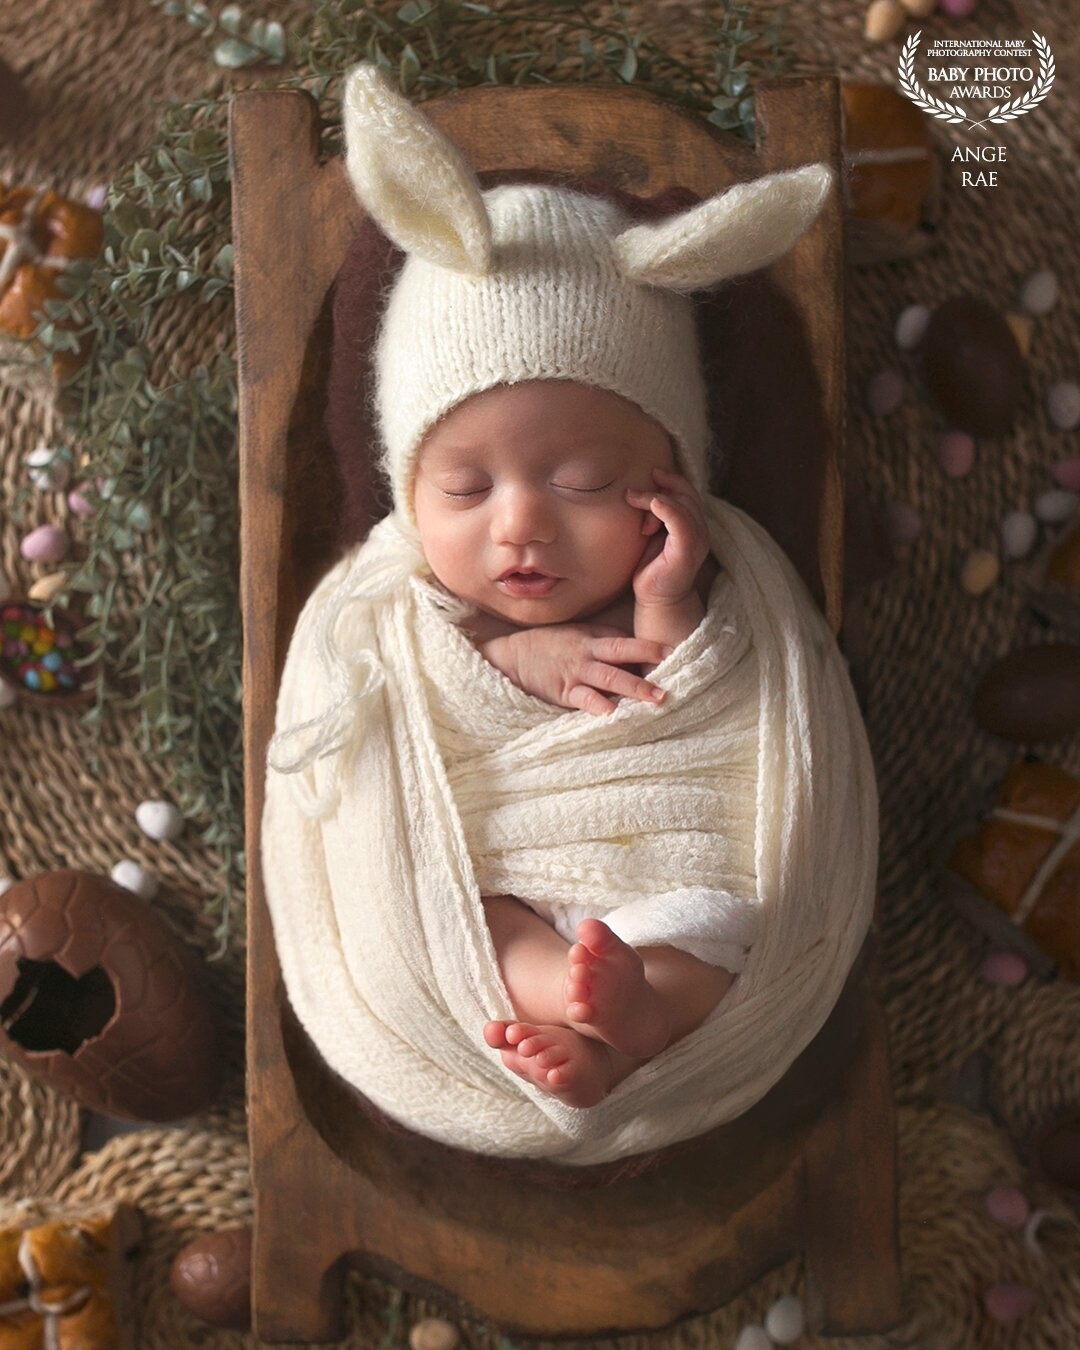 This little Easter Bunny arrived 10 weeks early! She was so, so sweet and slept through her entire session. Her Mummy & Daddy are so happy to finally have her at home with them.